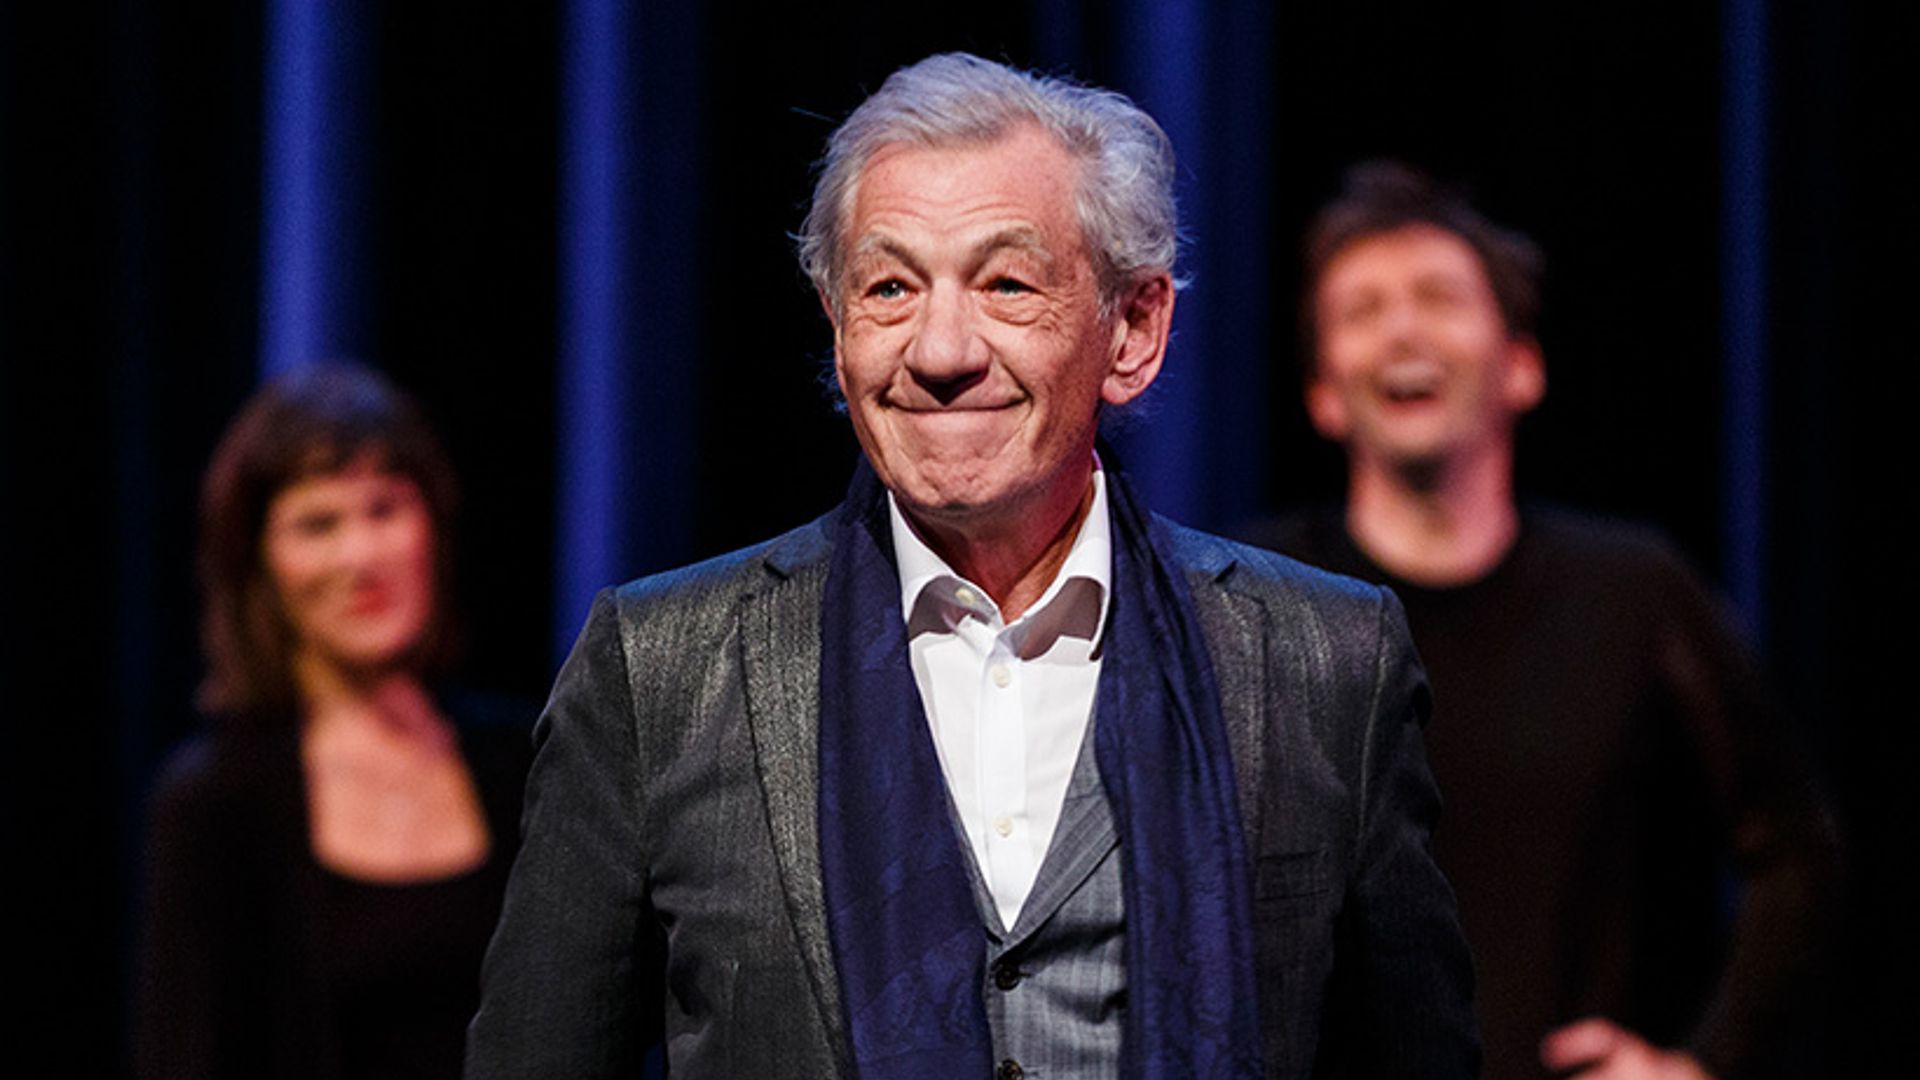 Sir Ian McKellen, 79, was forced to cancel show after he was injured at train station